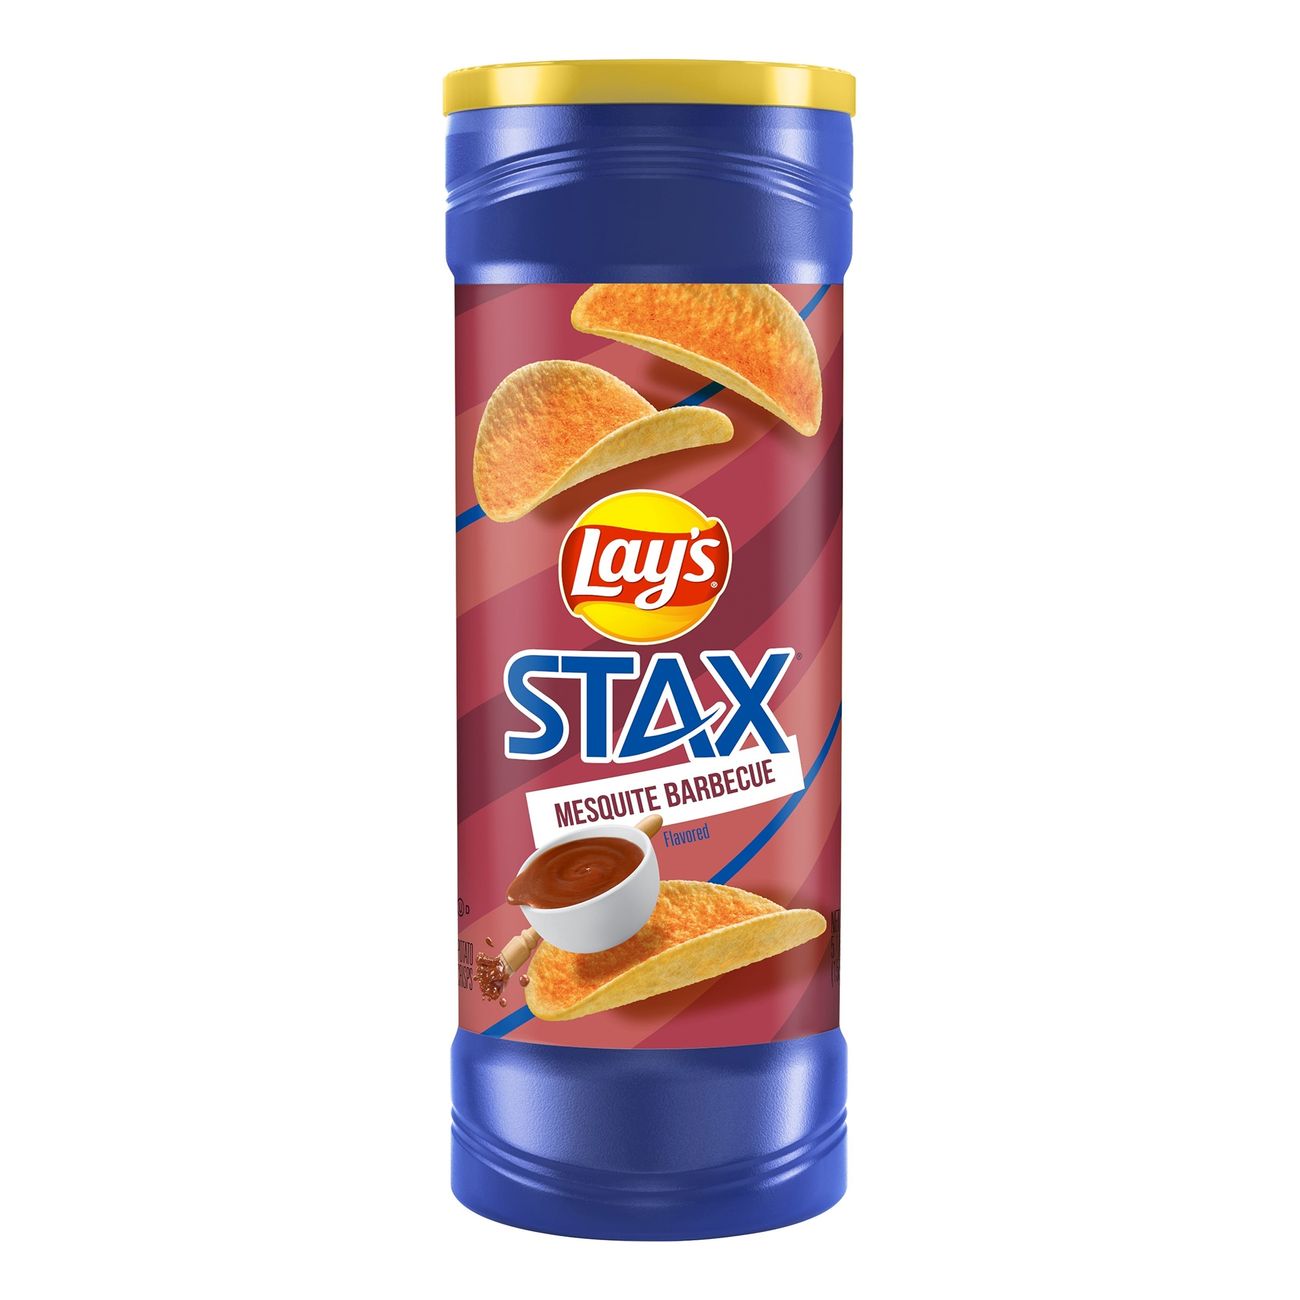 lays-stax-mesquite-barbecue-97096-2